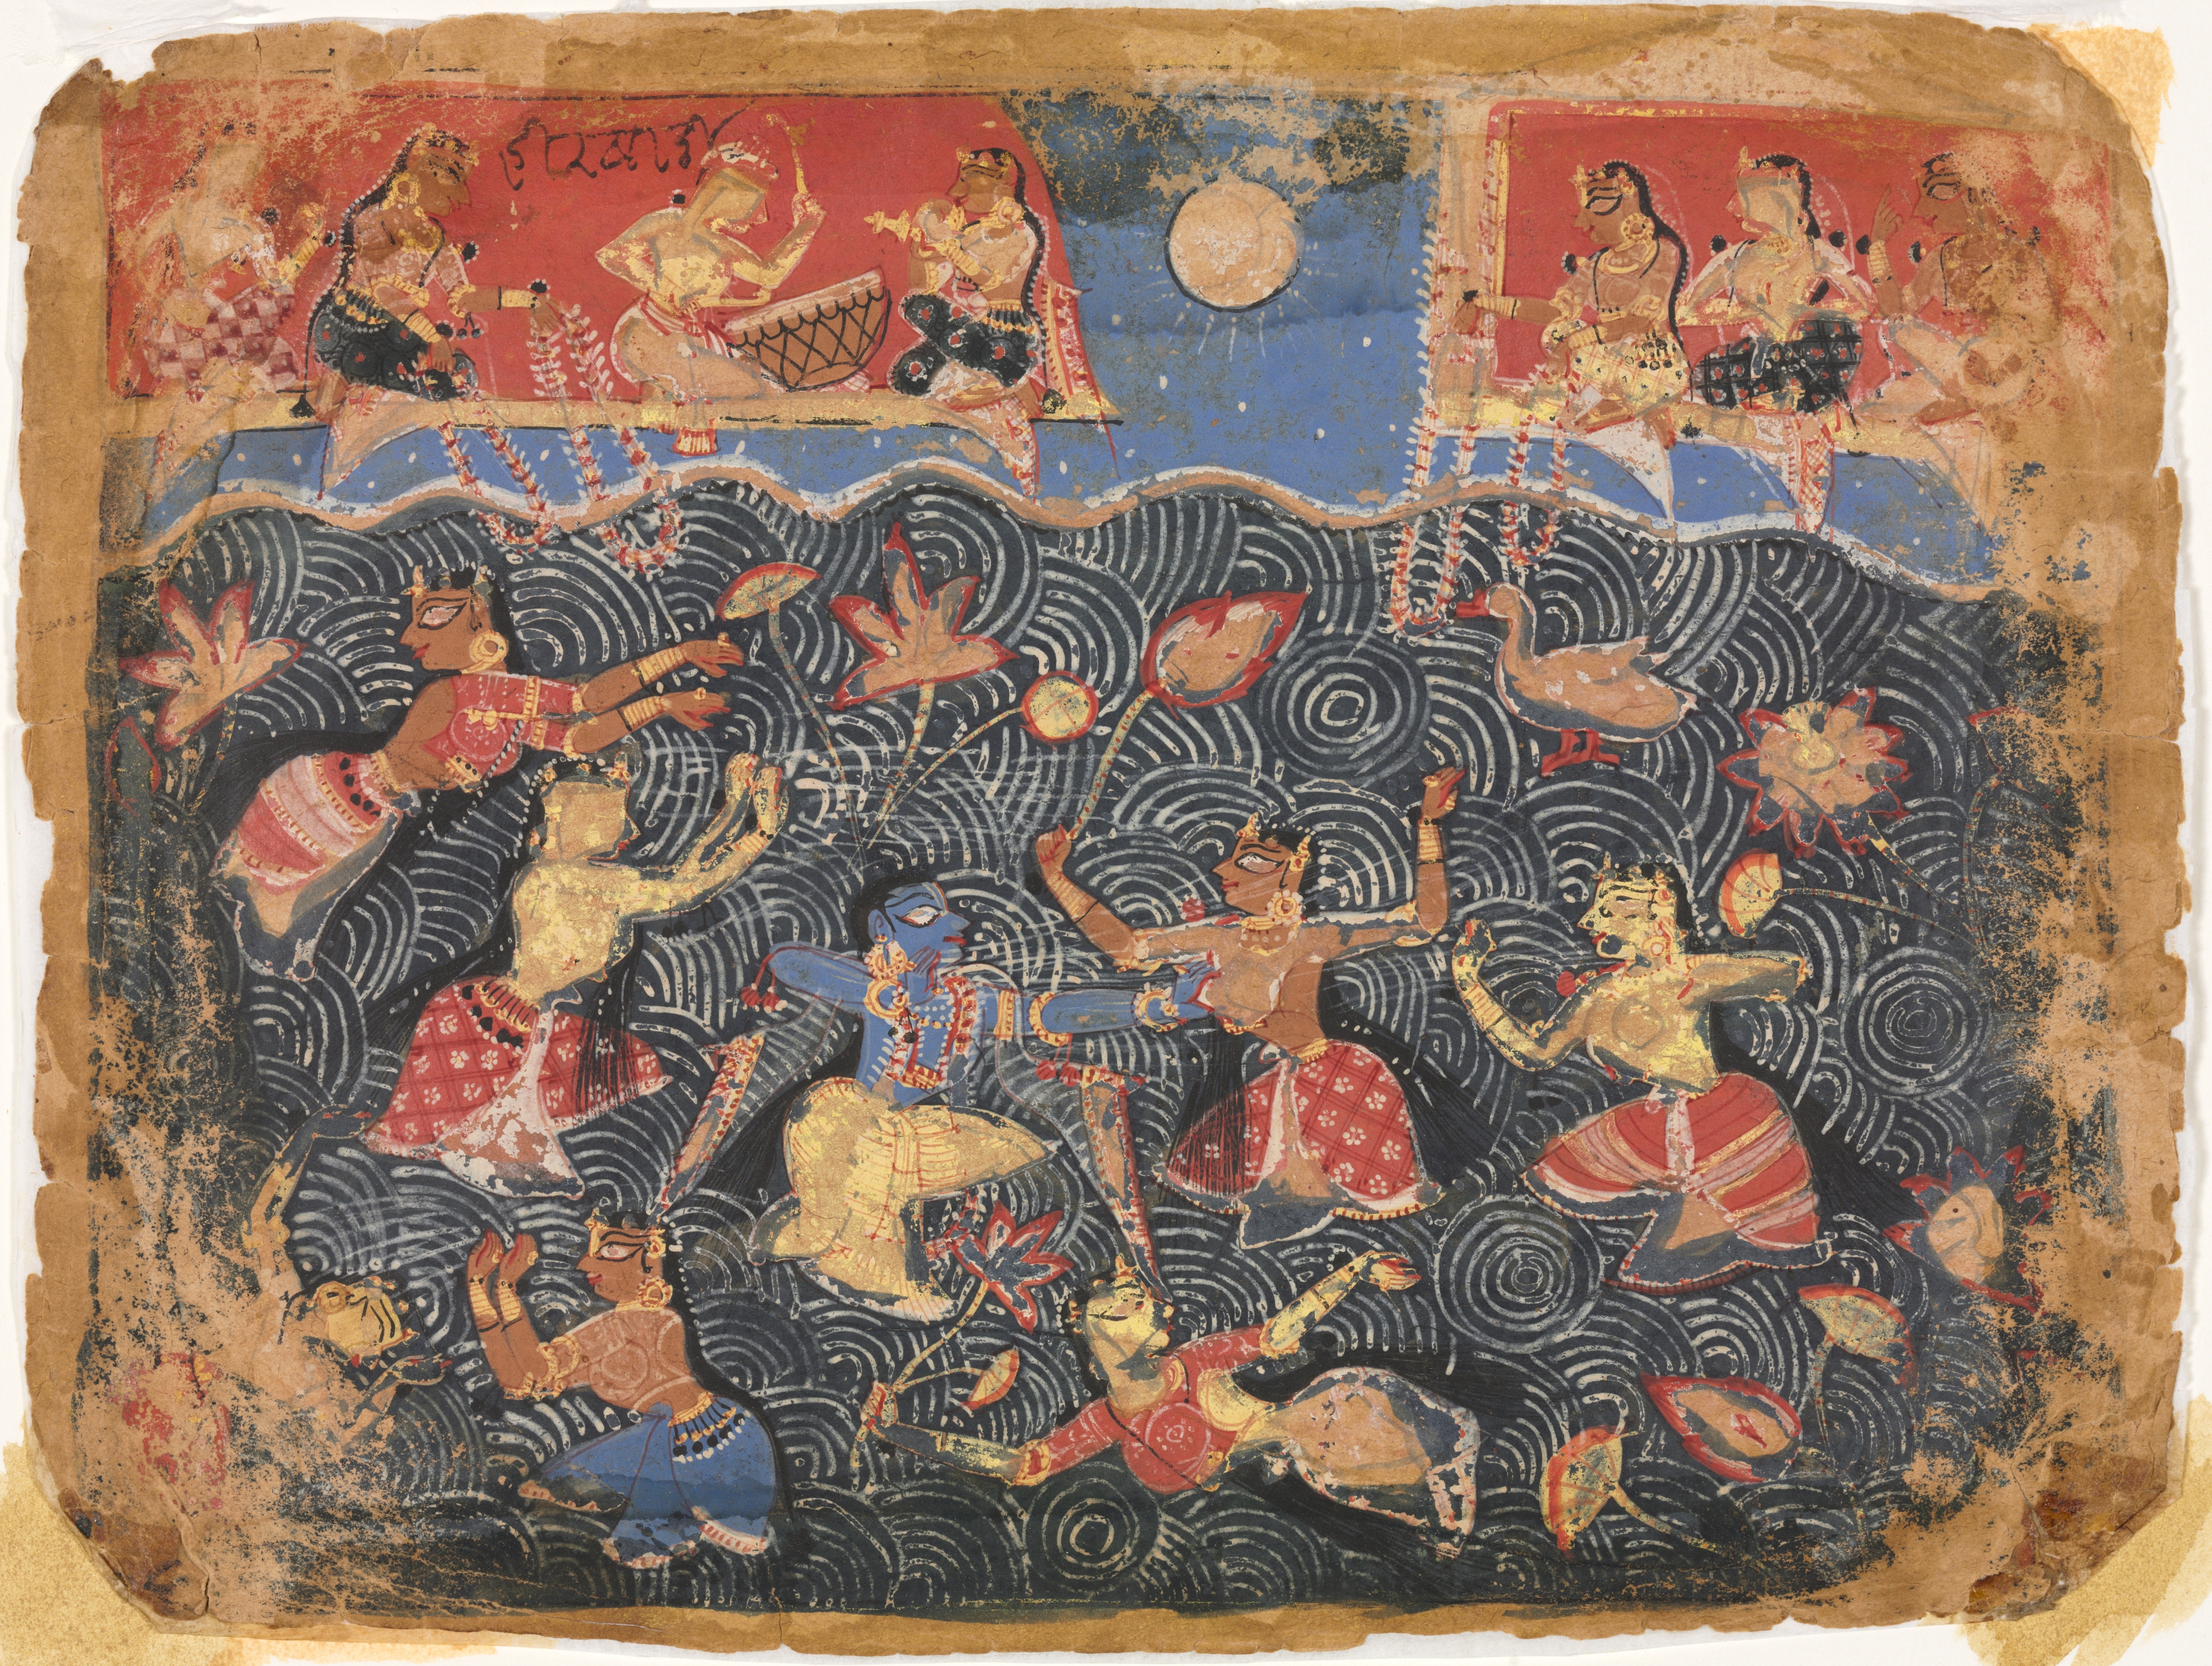 Krishna sporting with the gopis in the Jumna River, from a Bhagavata Purana